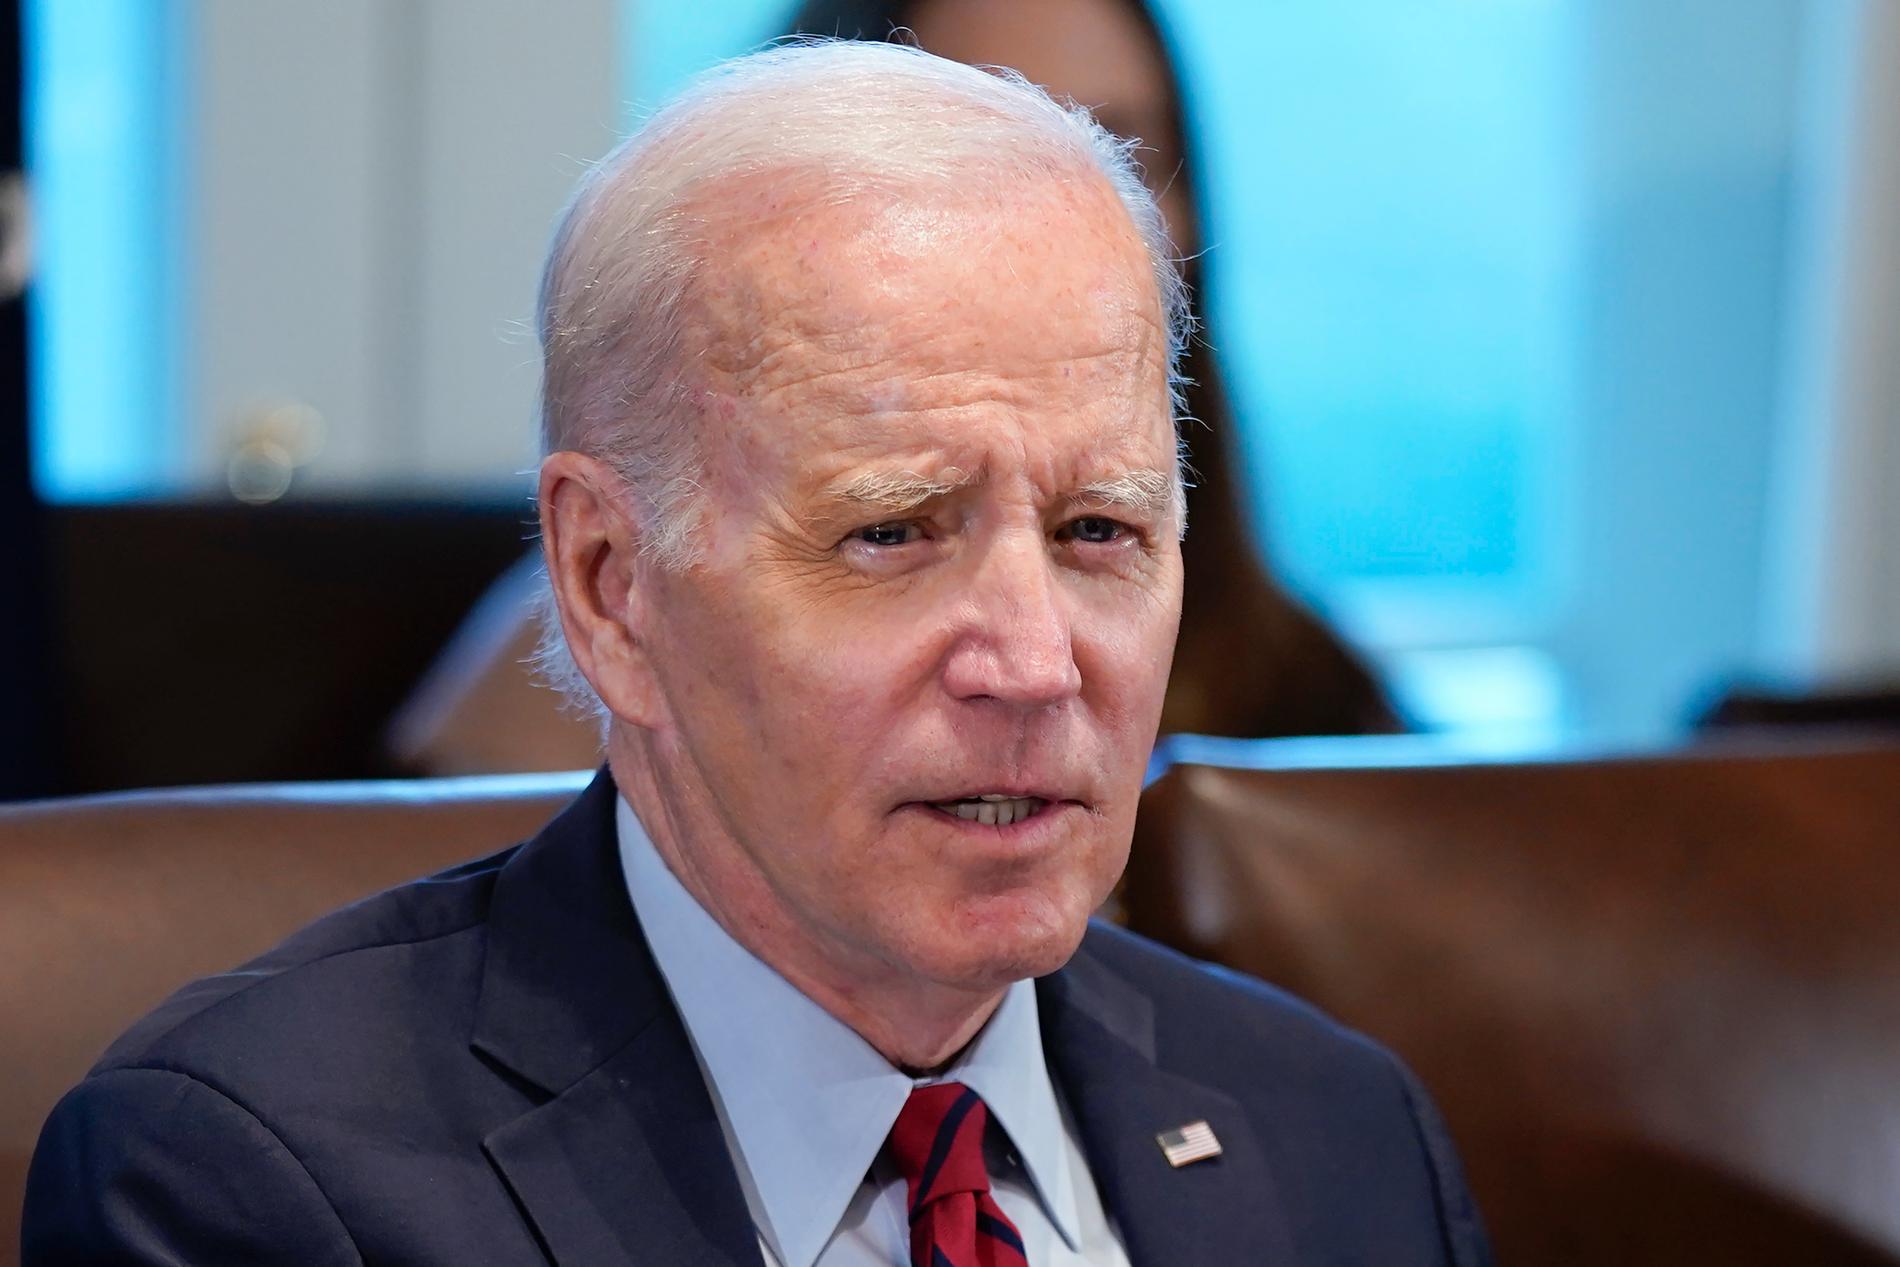 Classified documents were found on Biden’s property